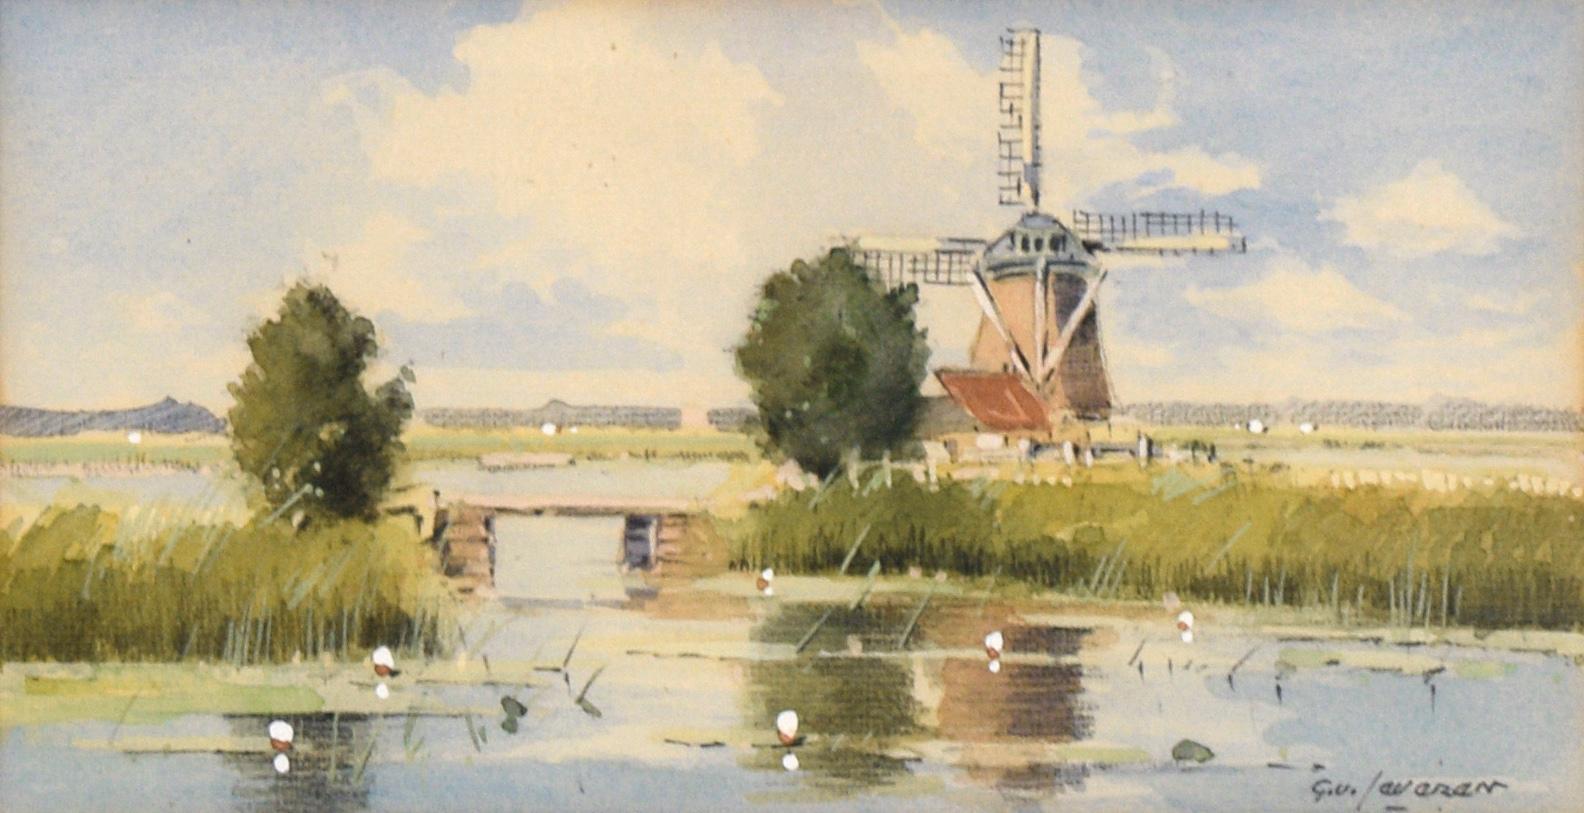 Dutch Windmill by the Pond, Landscape - Painting by Gustave Van Everen